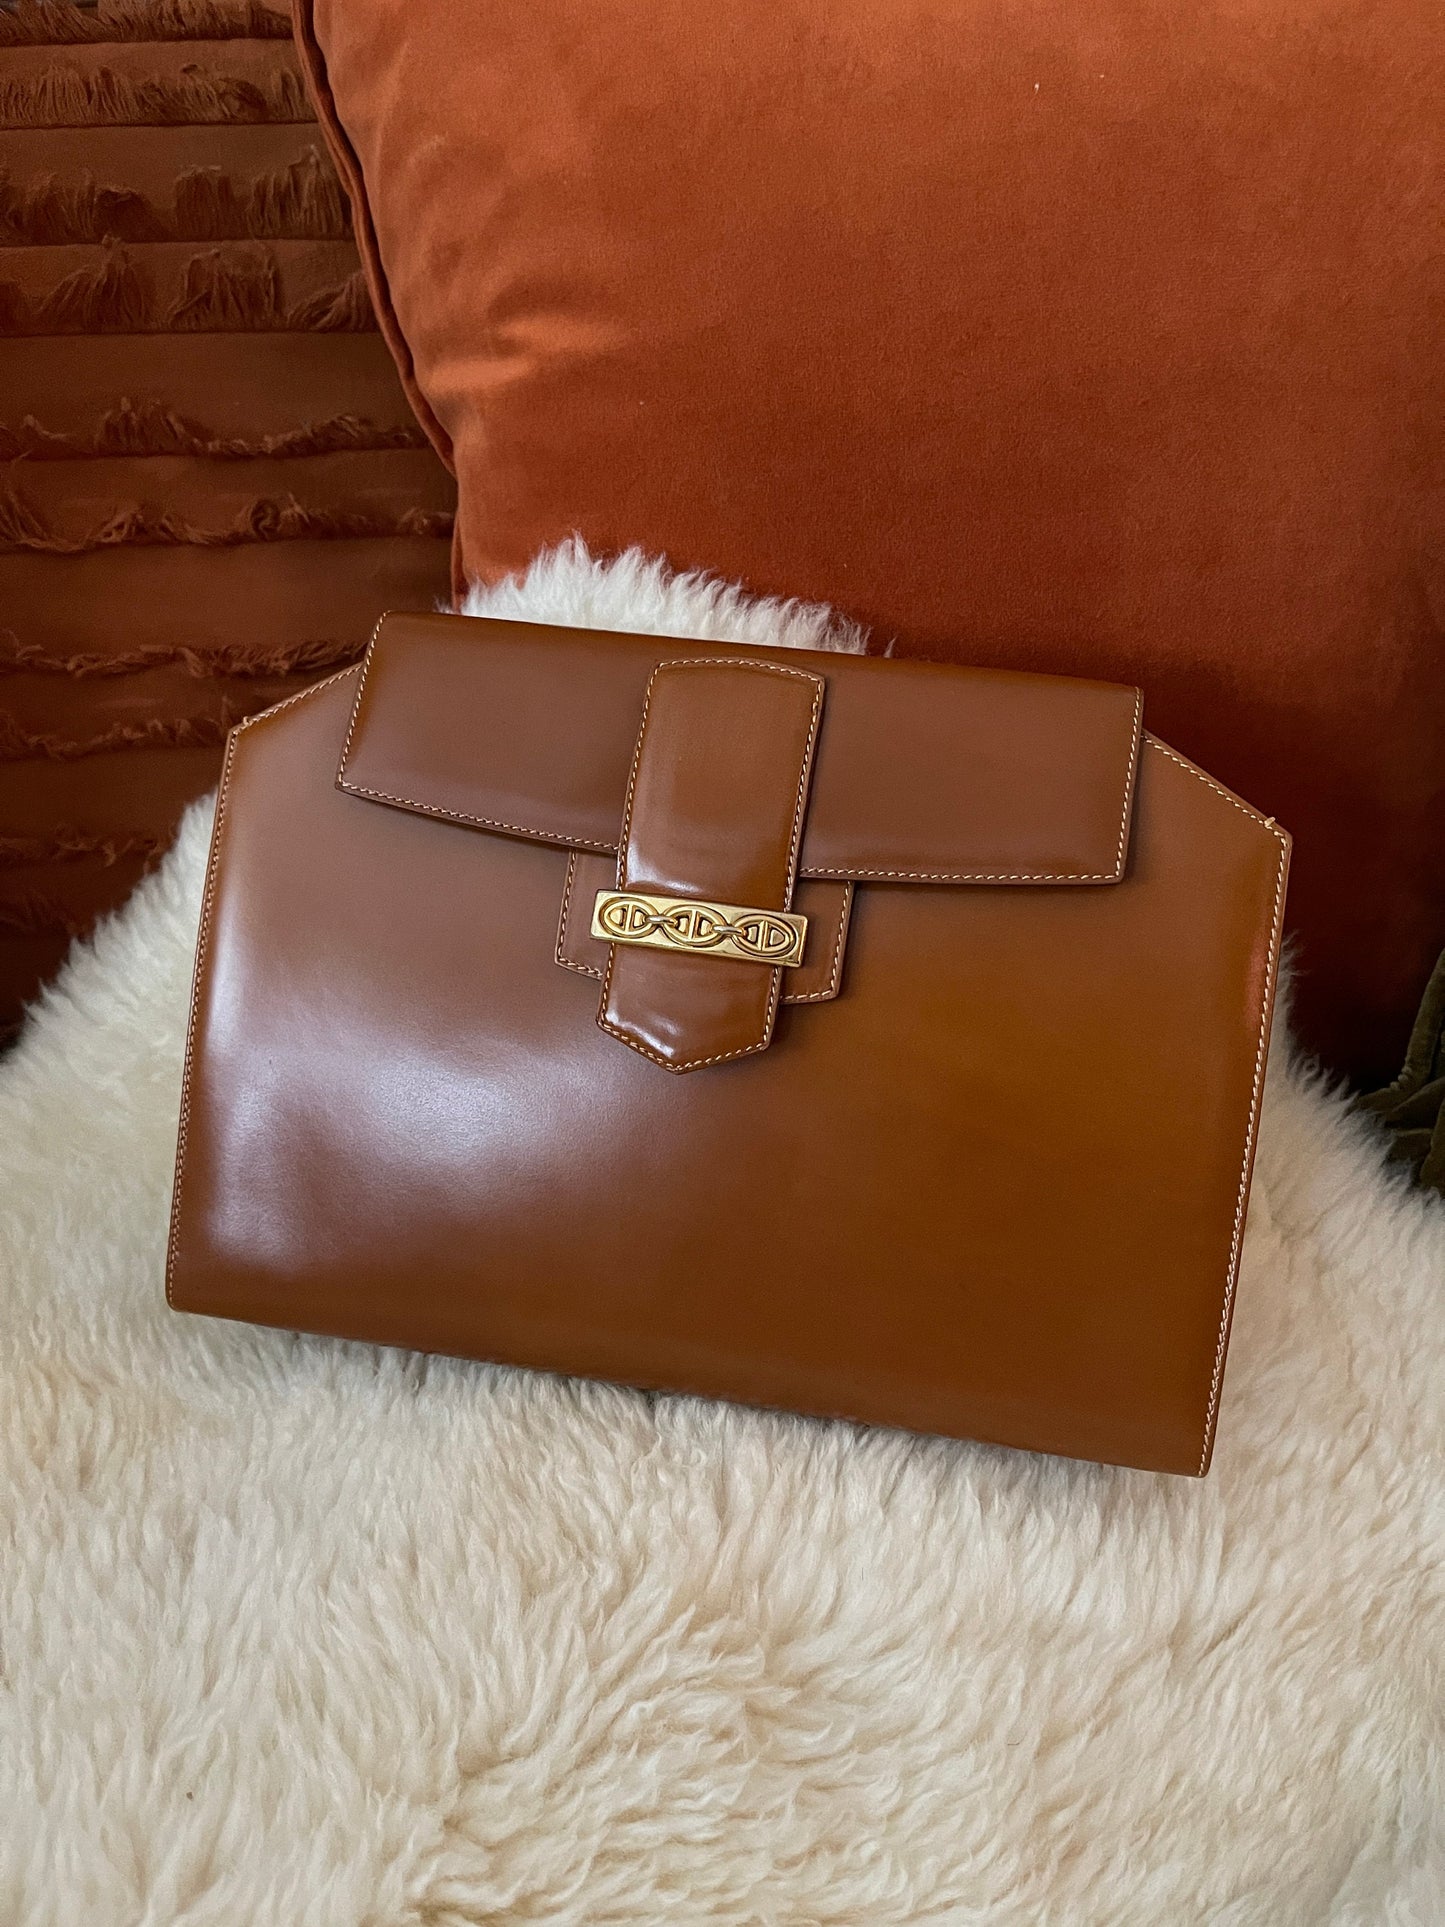 GUCCI VINTAGE 100% Authentic Genuine Glossy Leather Clutch, Caramel Colour, 1980's, Great Condition, Rare